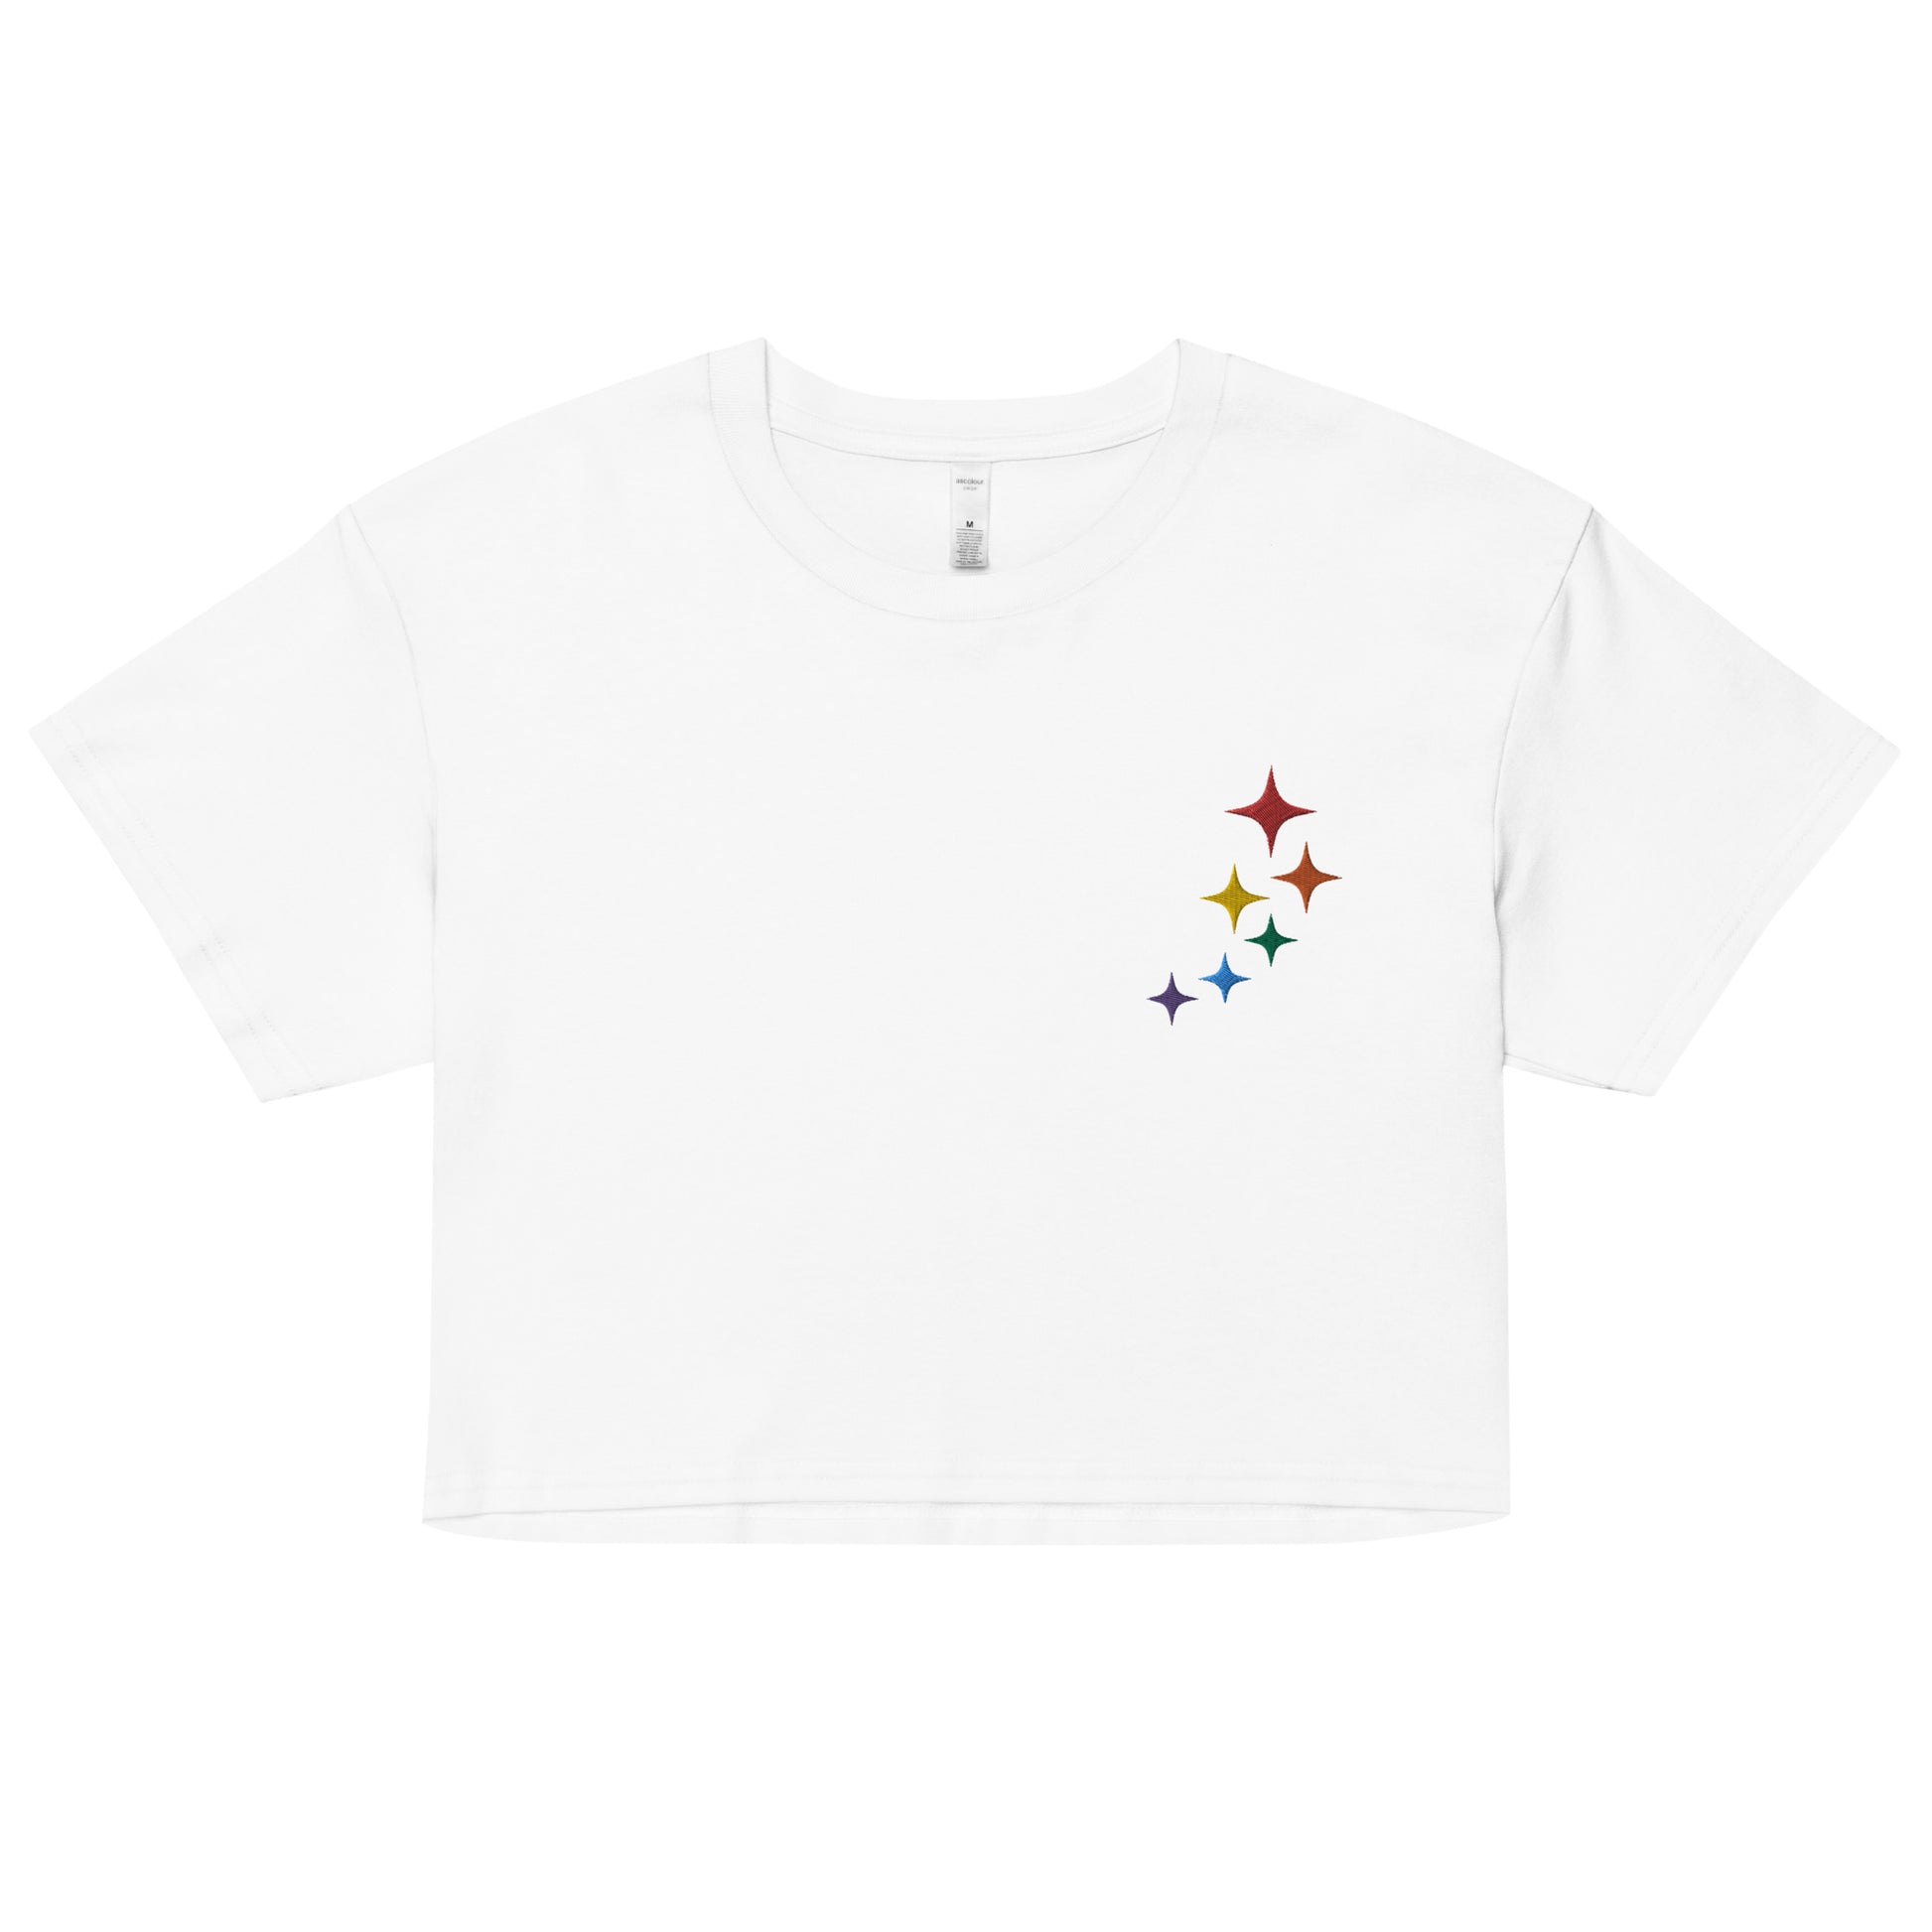 A relaxed, modest white crop top features a subtle rainbow stars embroidery. Adding a touch of rainbow to your look—a playful celebration of lgbtq culture! Made from 100% combed cotton. Available in Extra Small, Small, Medium, Large, Extra Large.